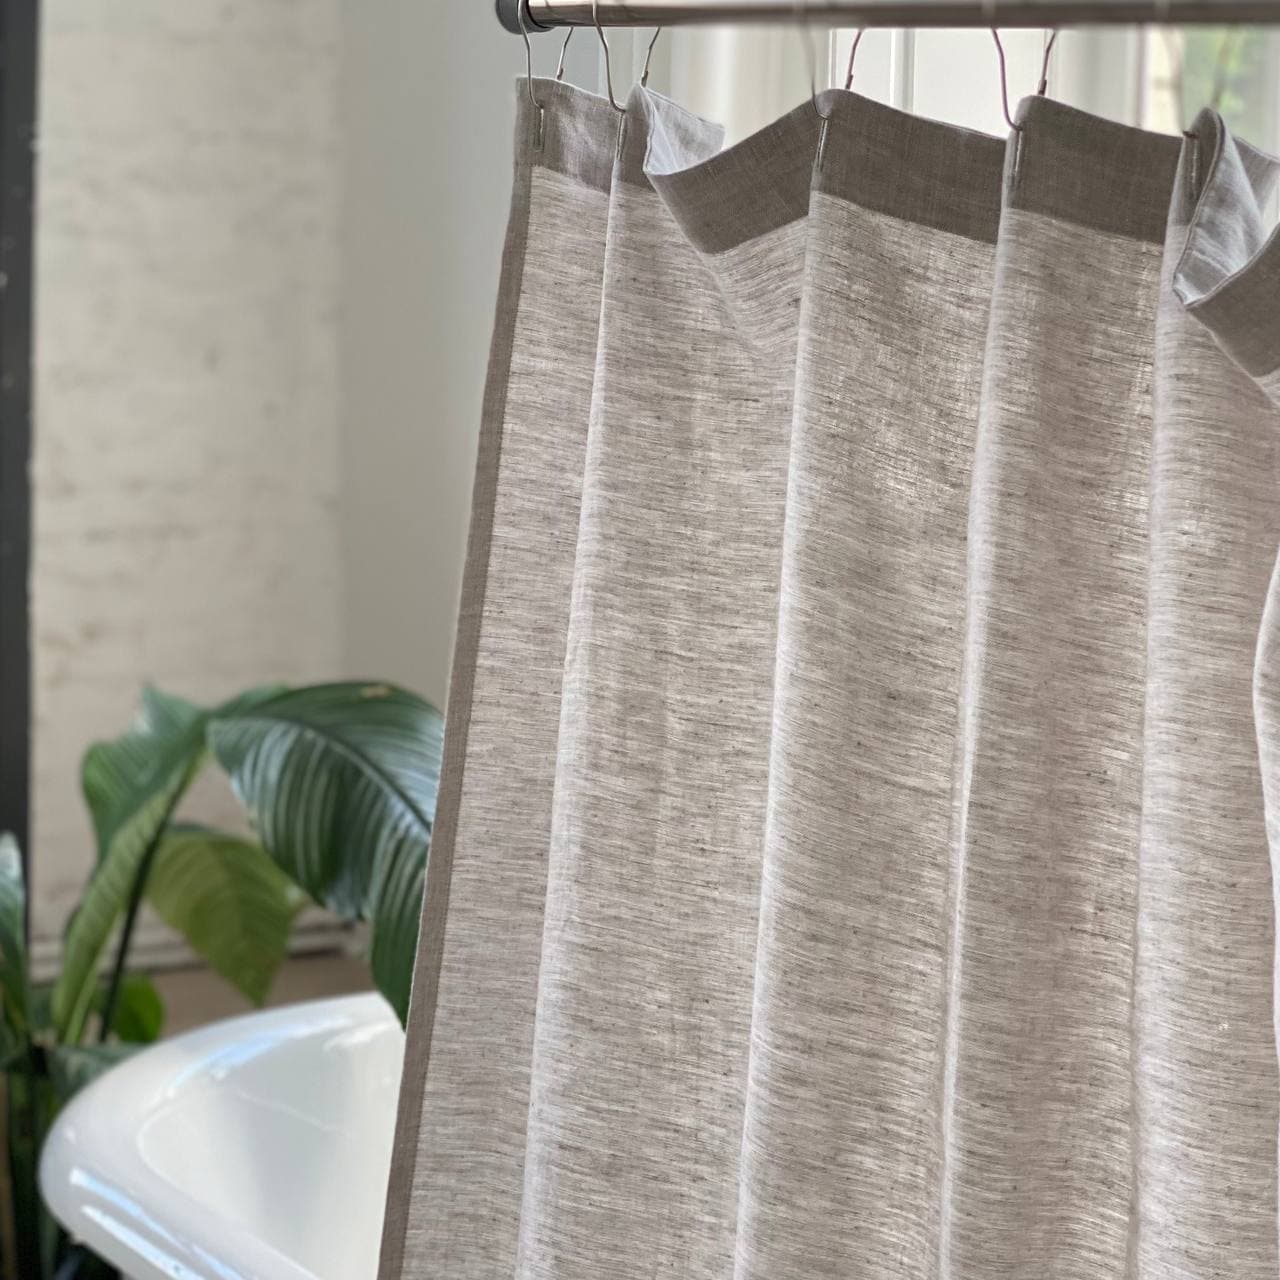 Linen Shower Curtain in Natural Color